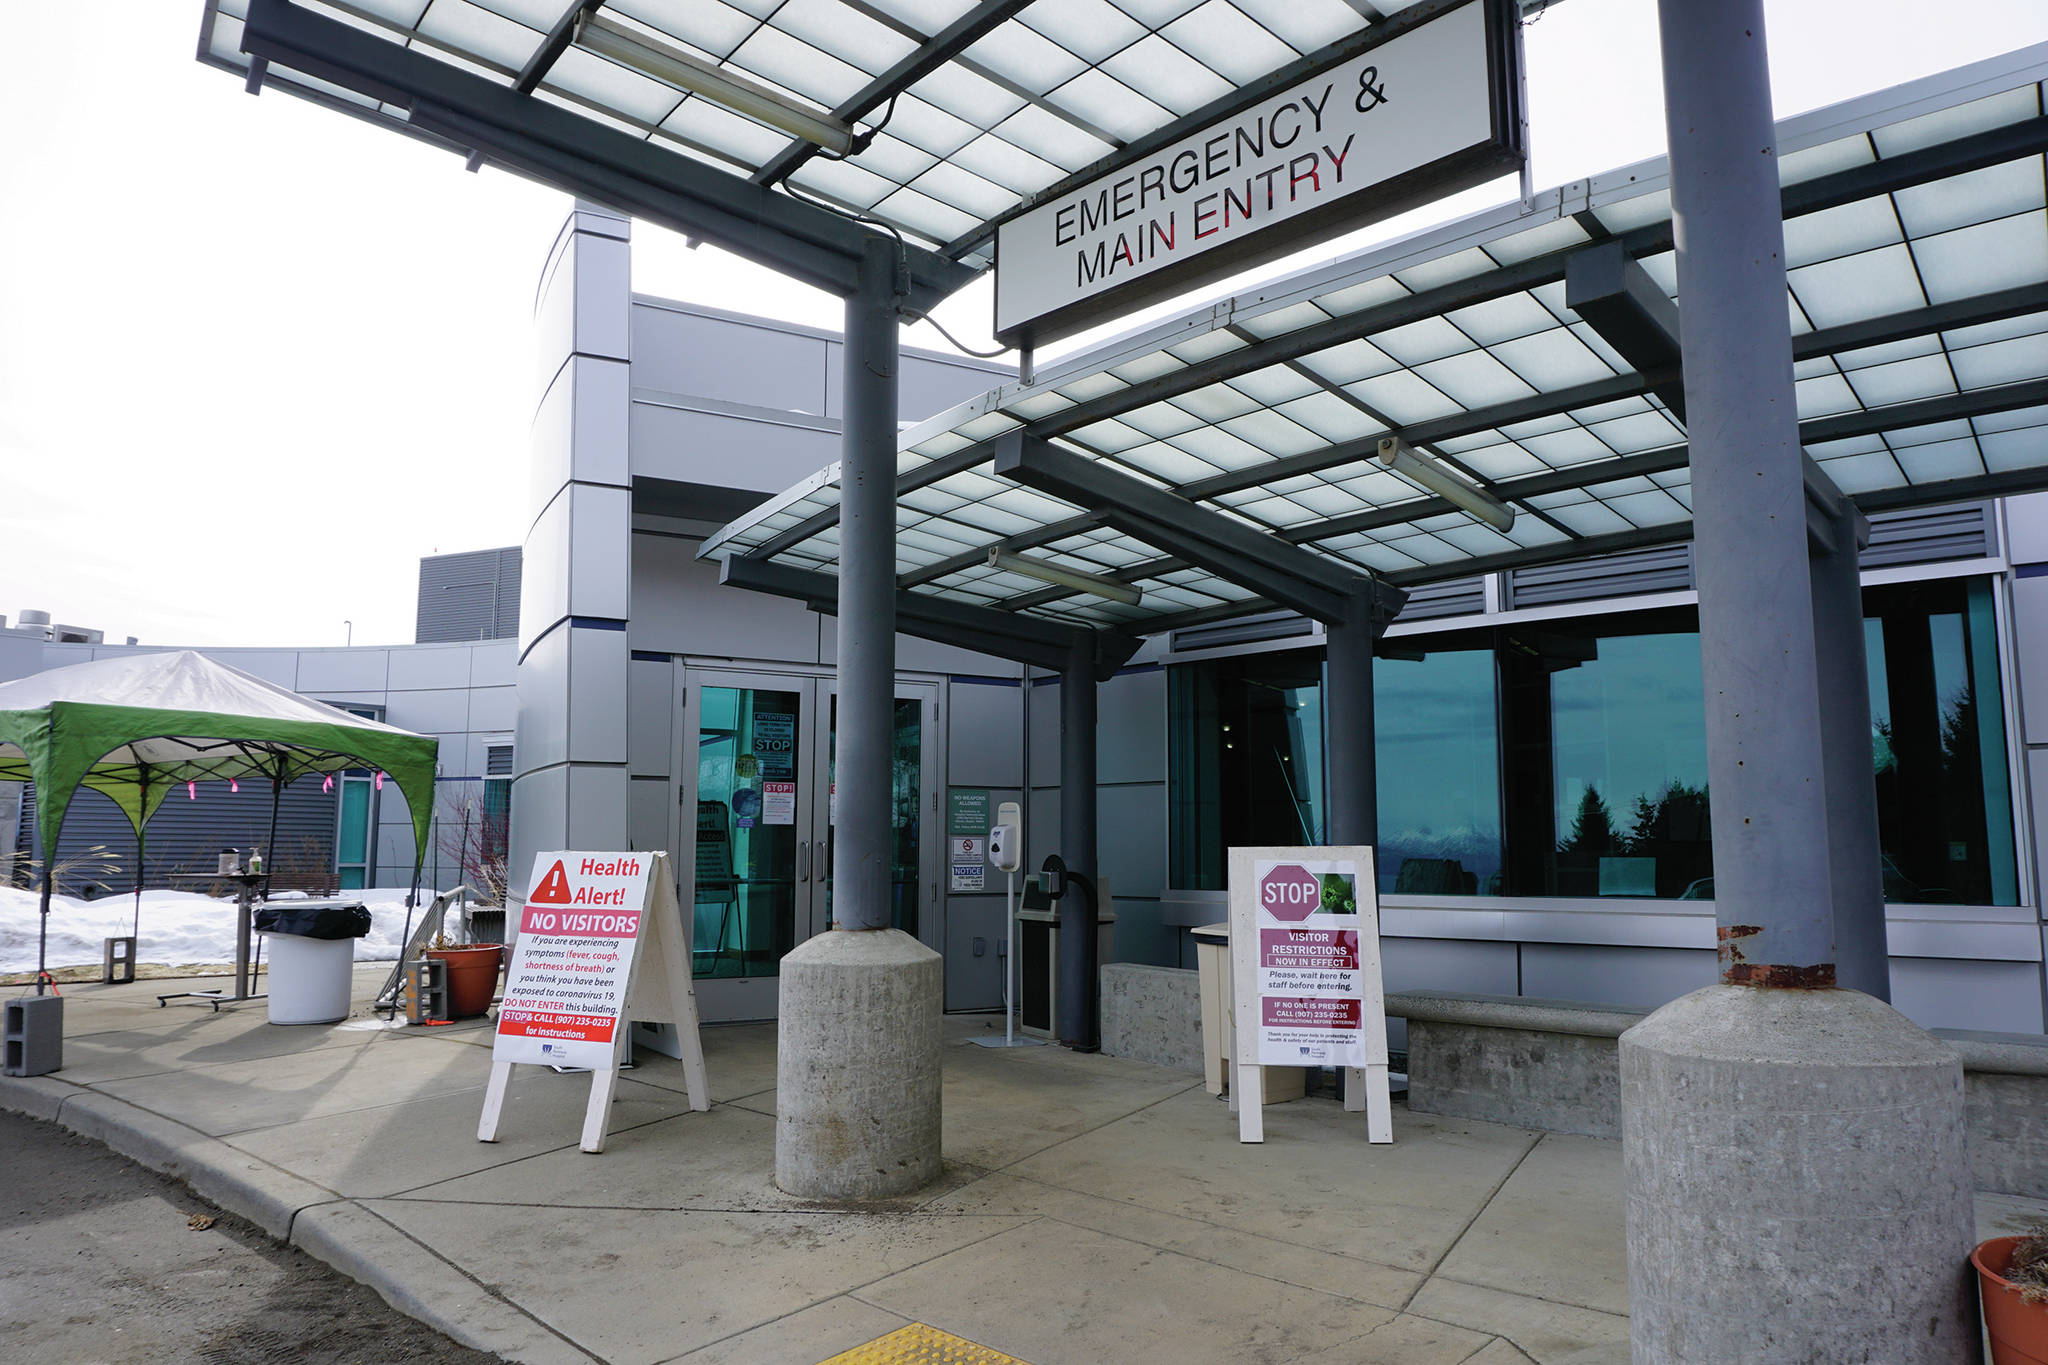 Signs on Saturday, March 28, 2020, at the main entrance to South Peninsula Hospital in Homer, Alaska, warn visitors not to enter until they have been met by hospital staff. (Photo by Michael Armstrong/Homer News)